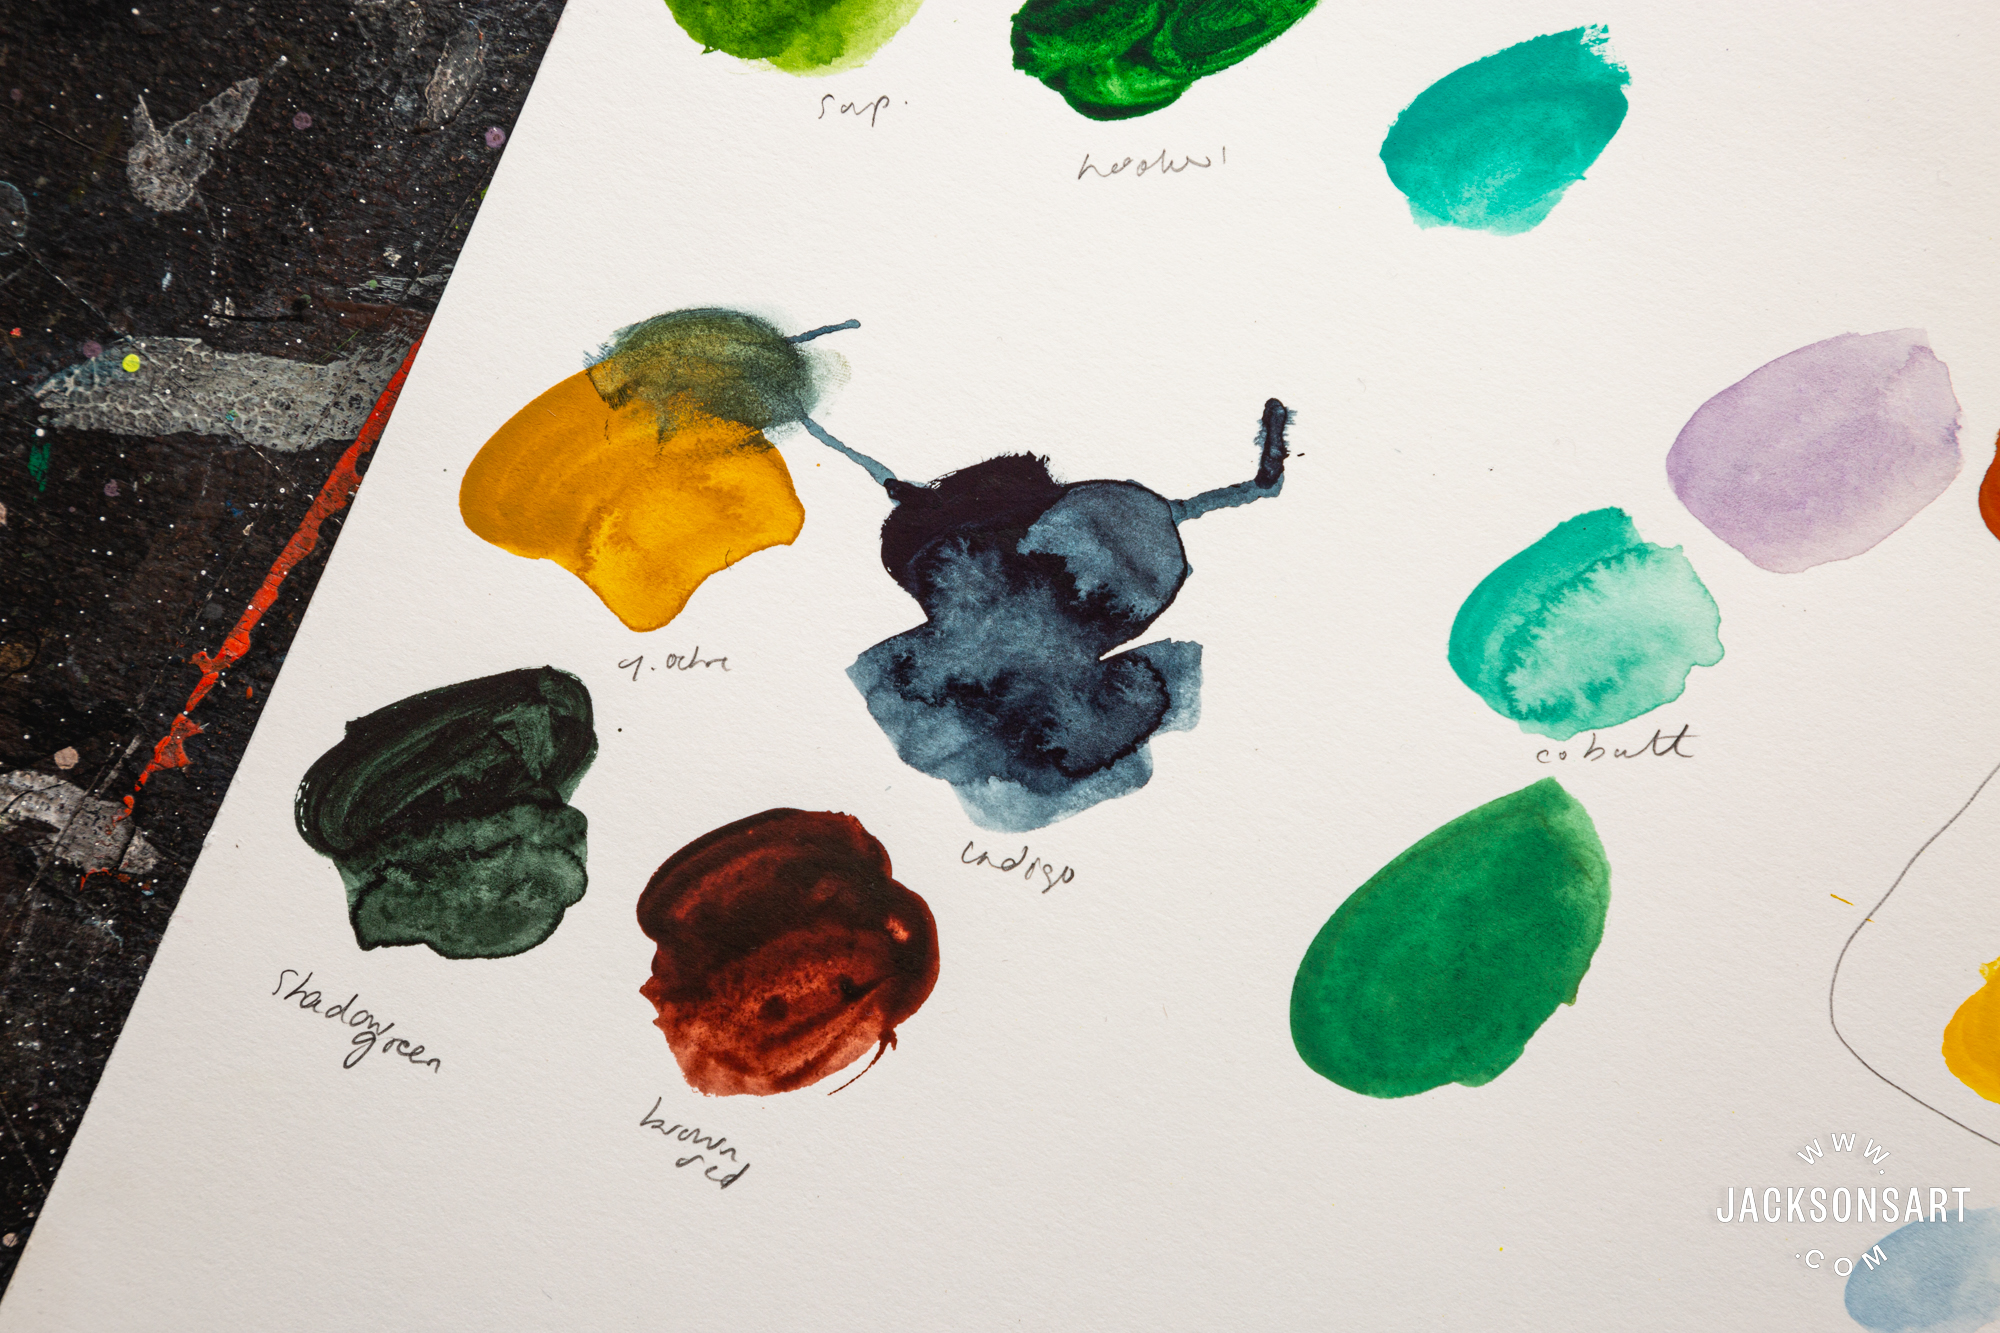 This Gouache Palette Could Be a GAME CHANGER for Your Gouache